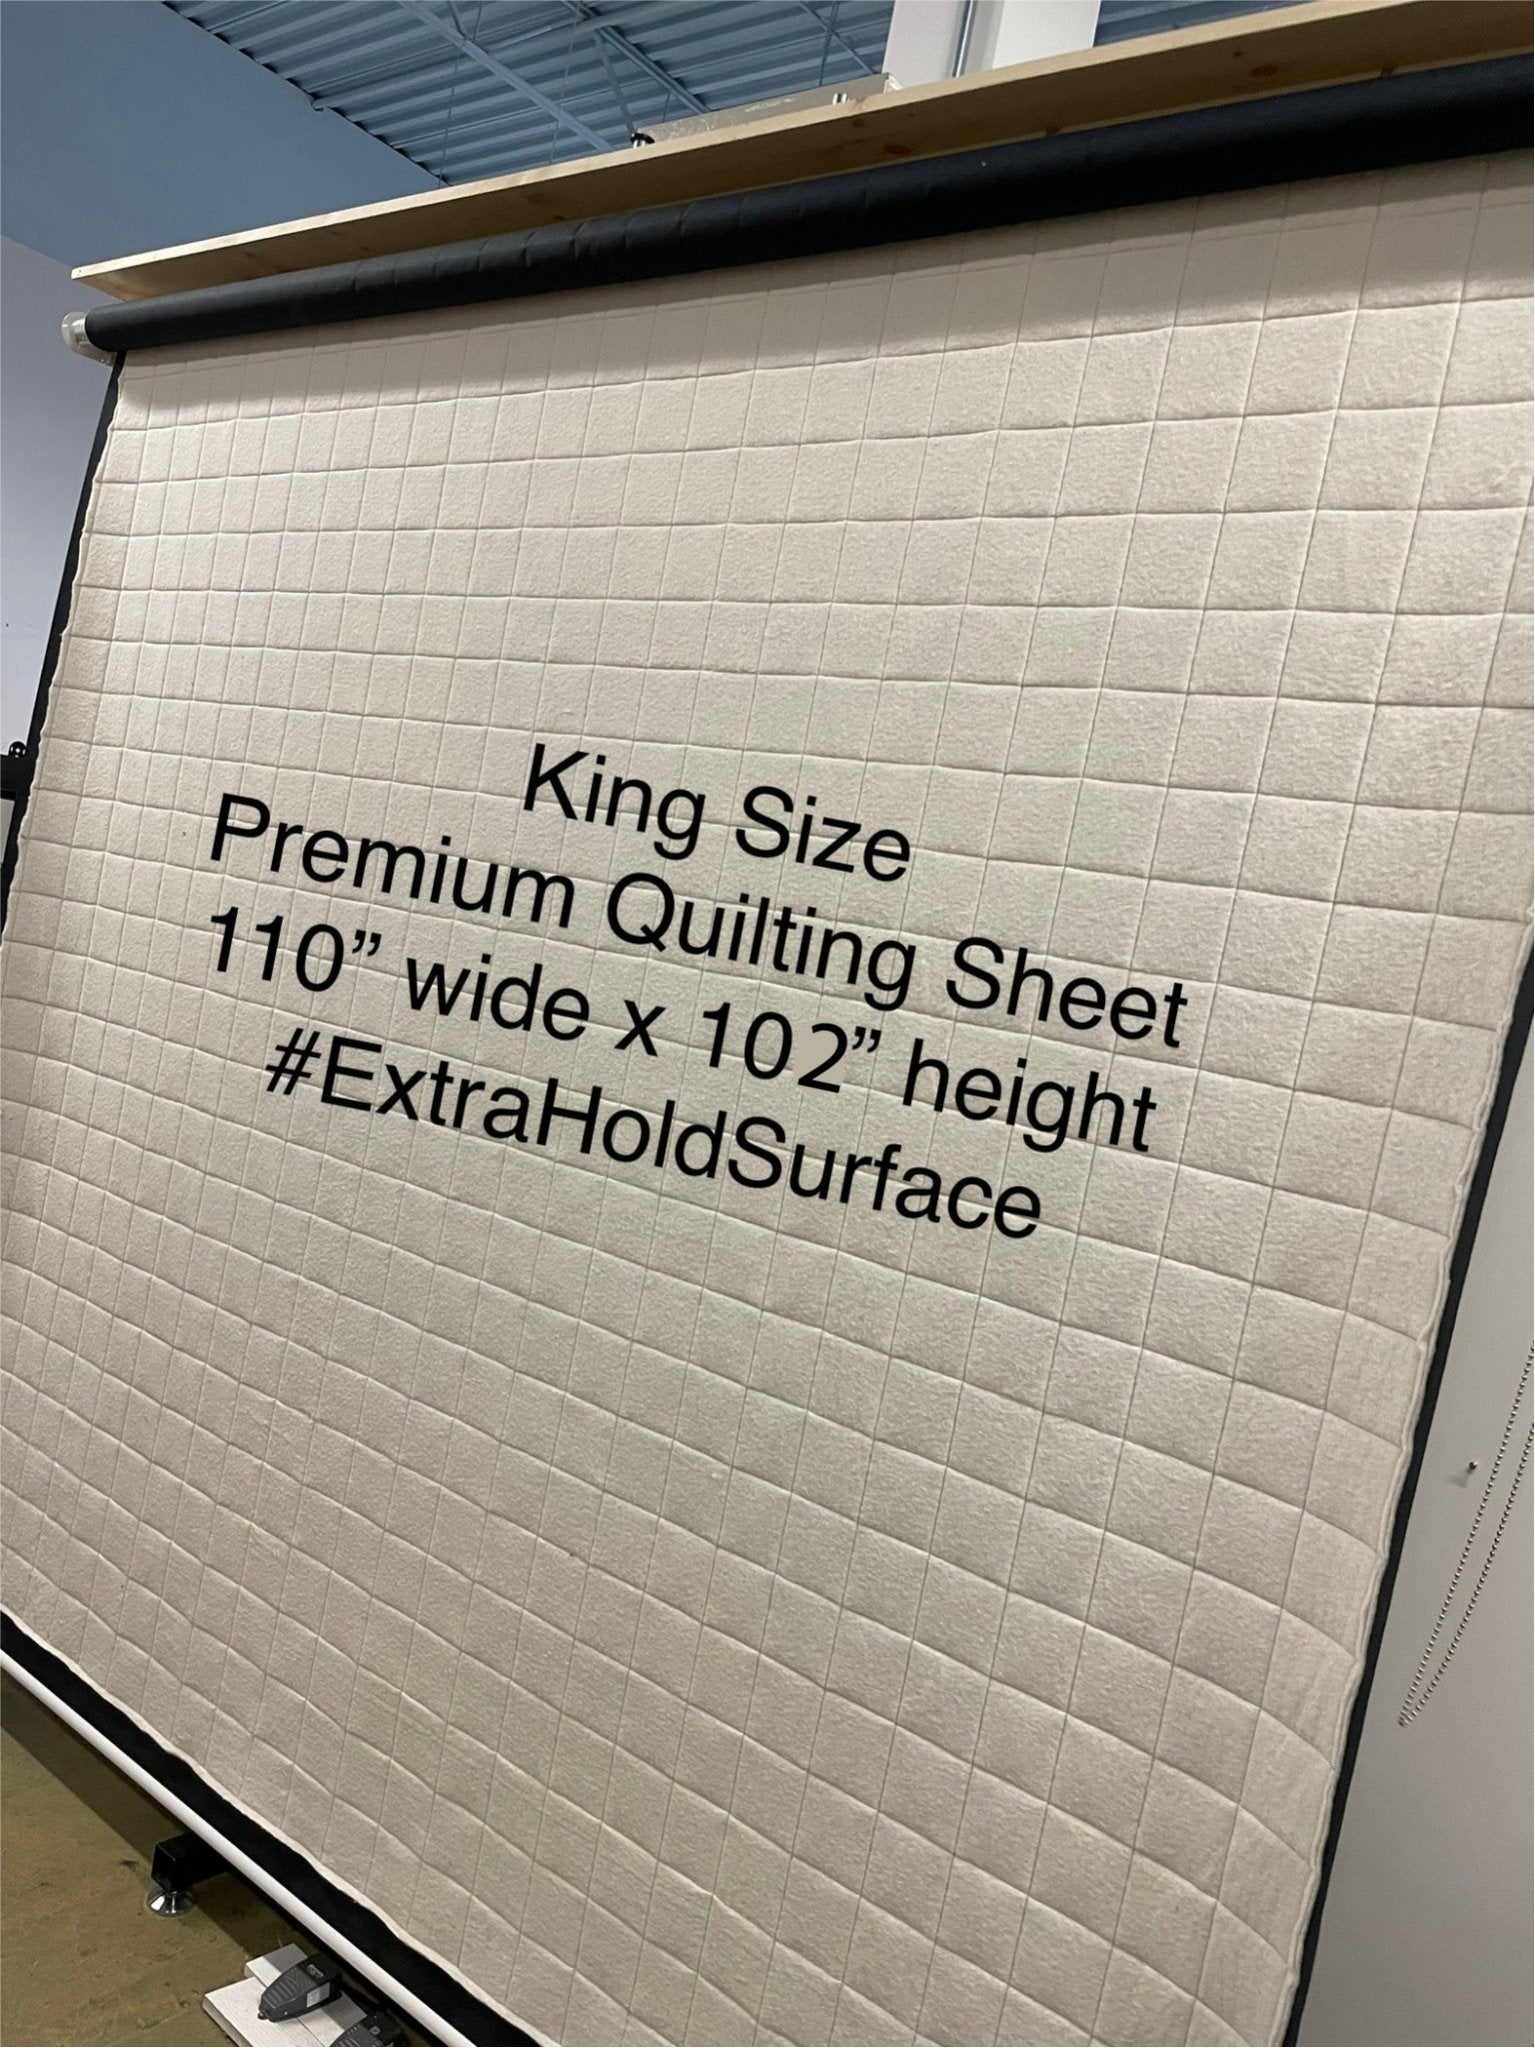 Premium Quilting Wall - King Size - Full (Including 1 premium quilting sheet)